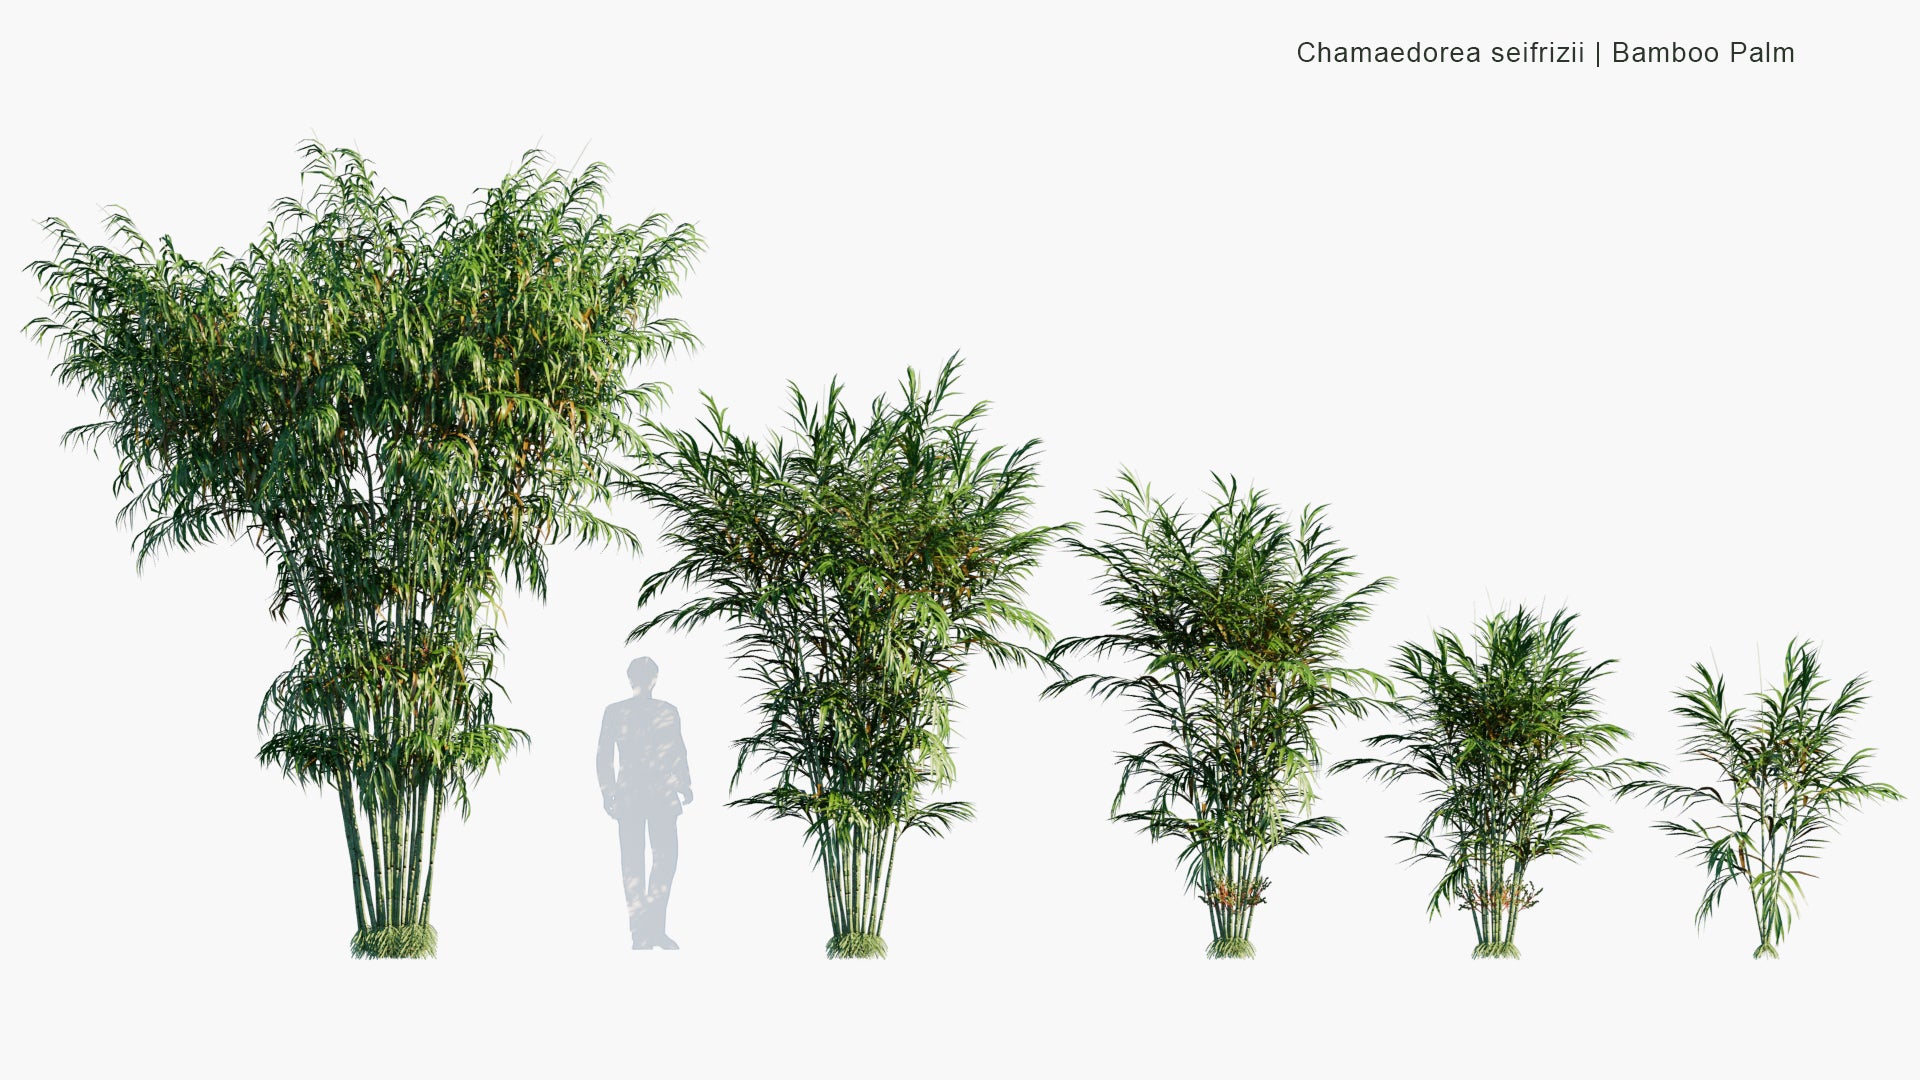 Low Poly Chamaedorea Seifrizii - Bamboo Palm, Parlor Palm, Reed Palm (3D Model)